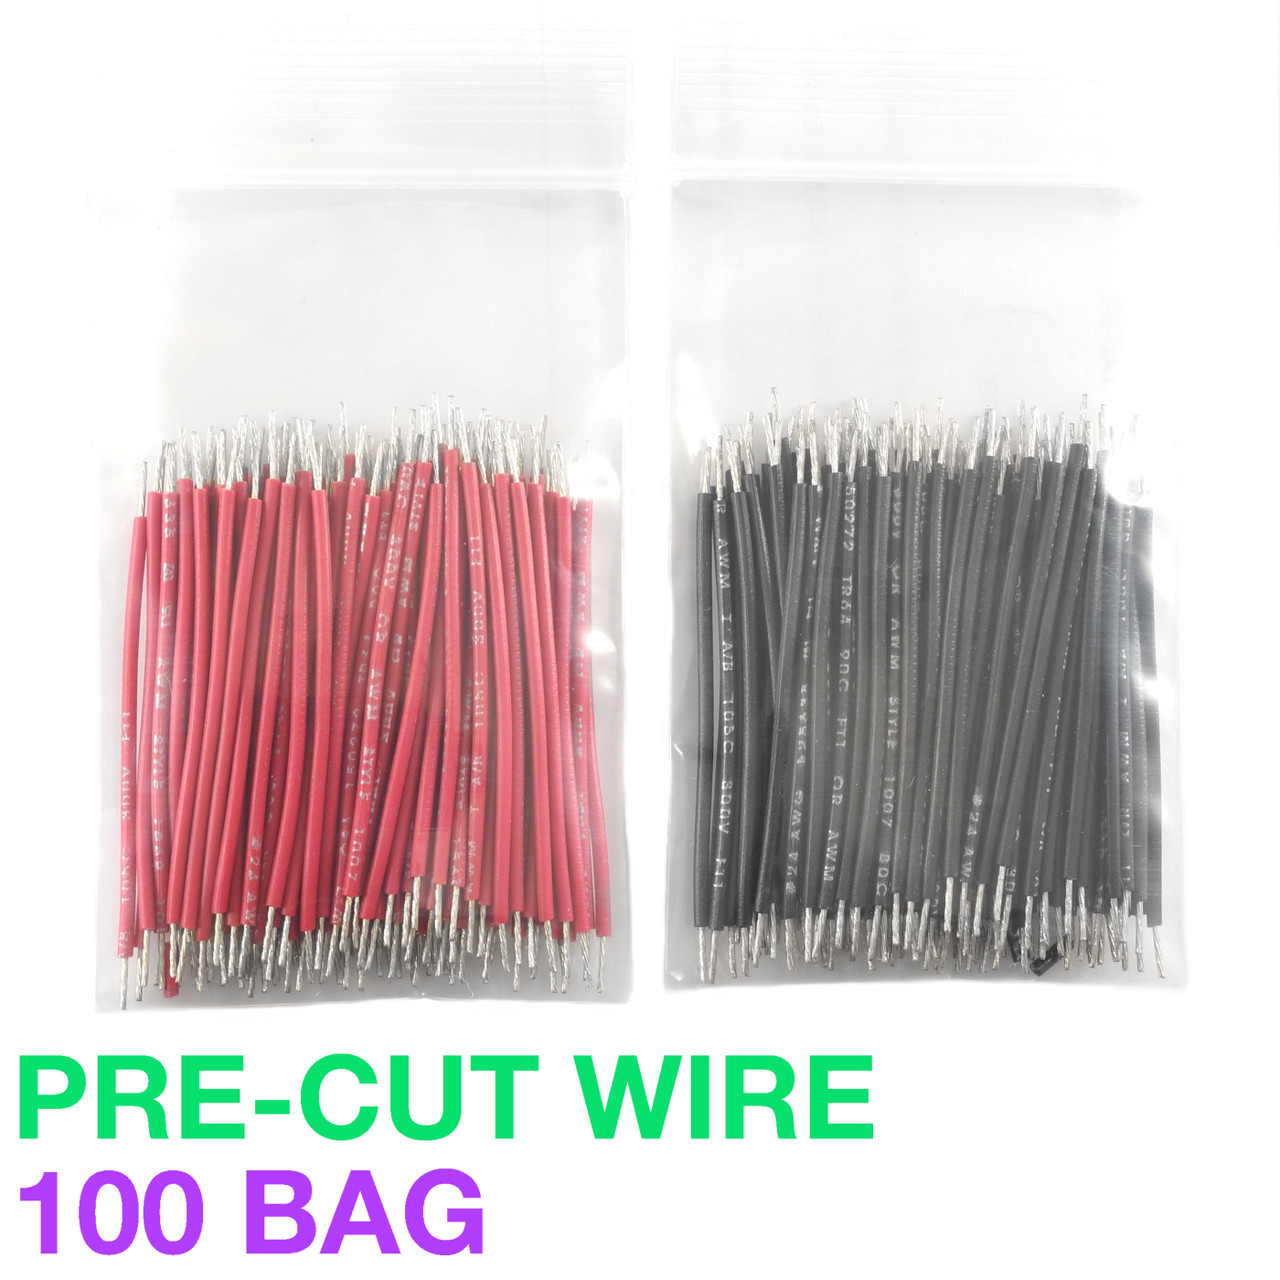 https://cdn11.bigcommerce.com/s-rsm98uvo0c/images/stencil/1280x1280/products/472/3375/2023.01_precut_wire_red_and_black__91445.1681331552.jpg?c=2